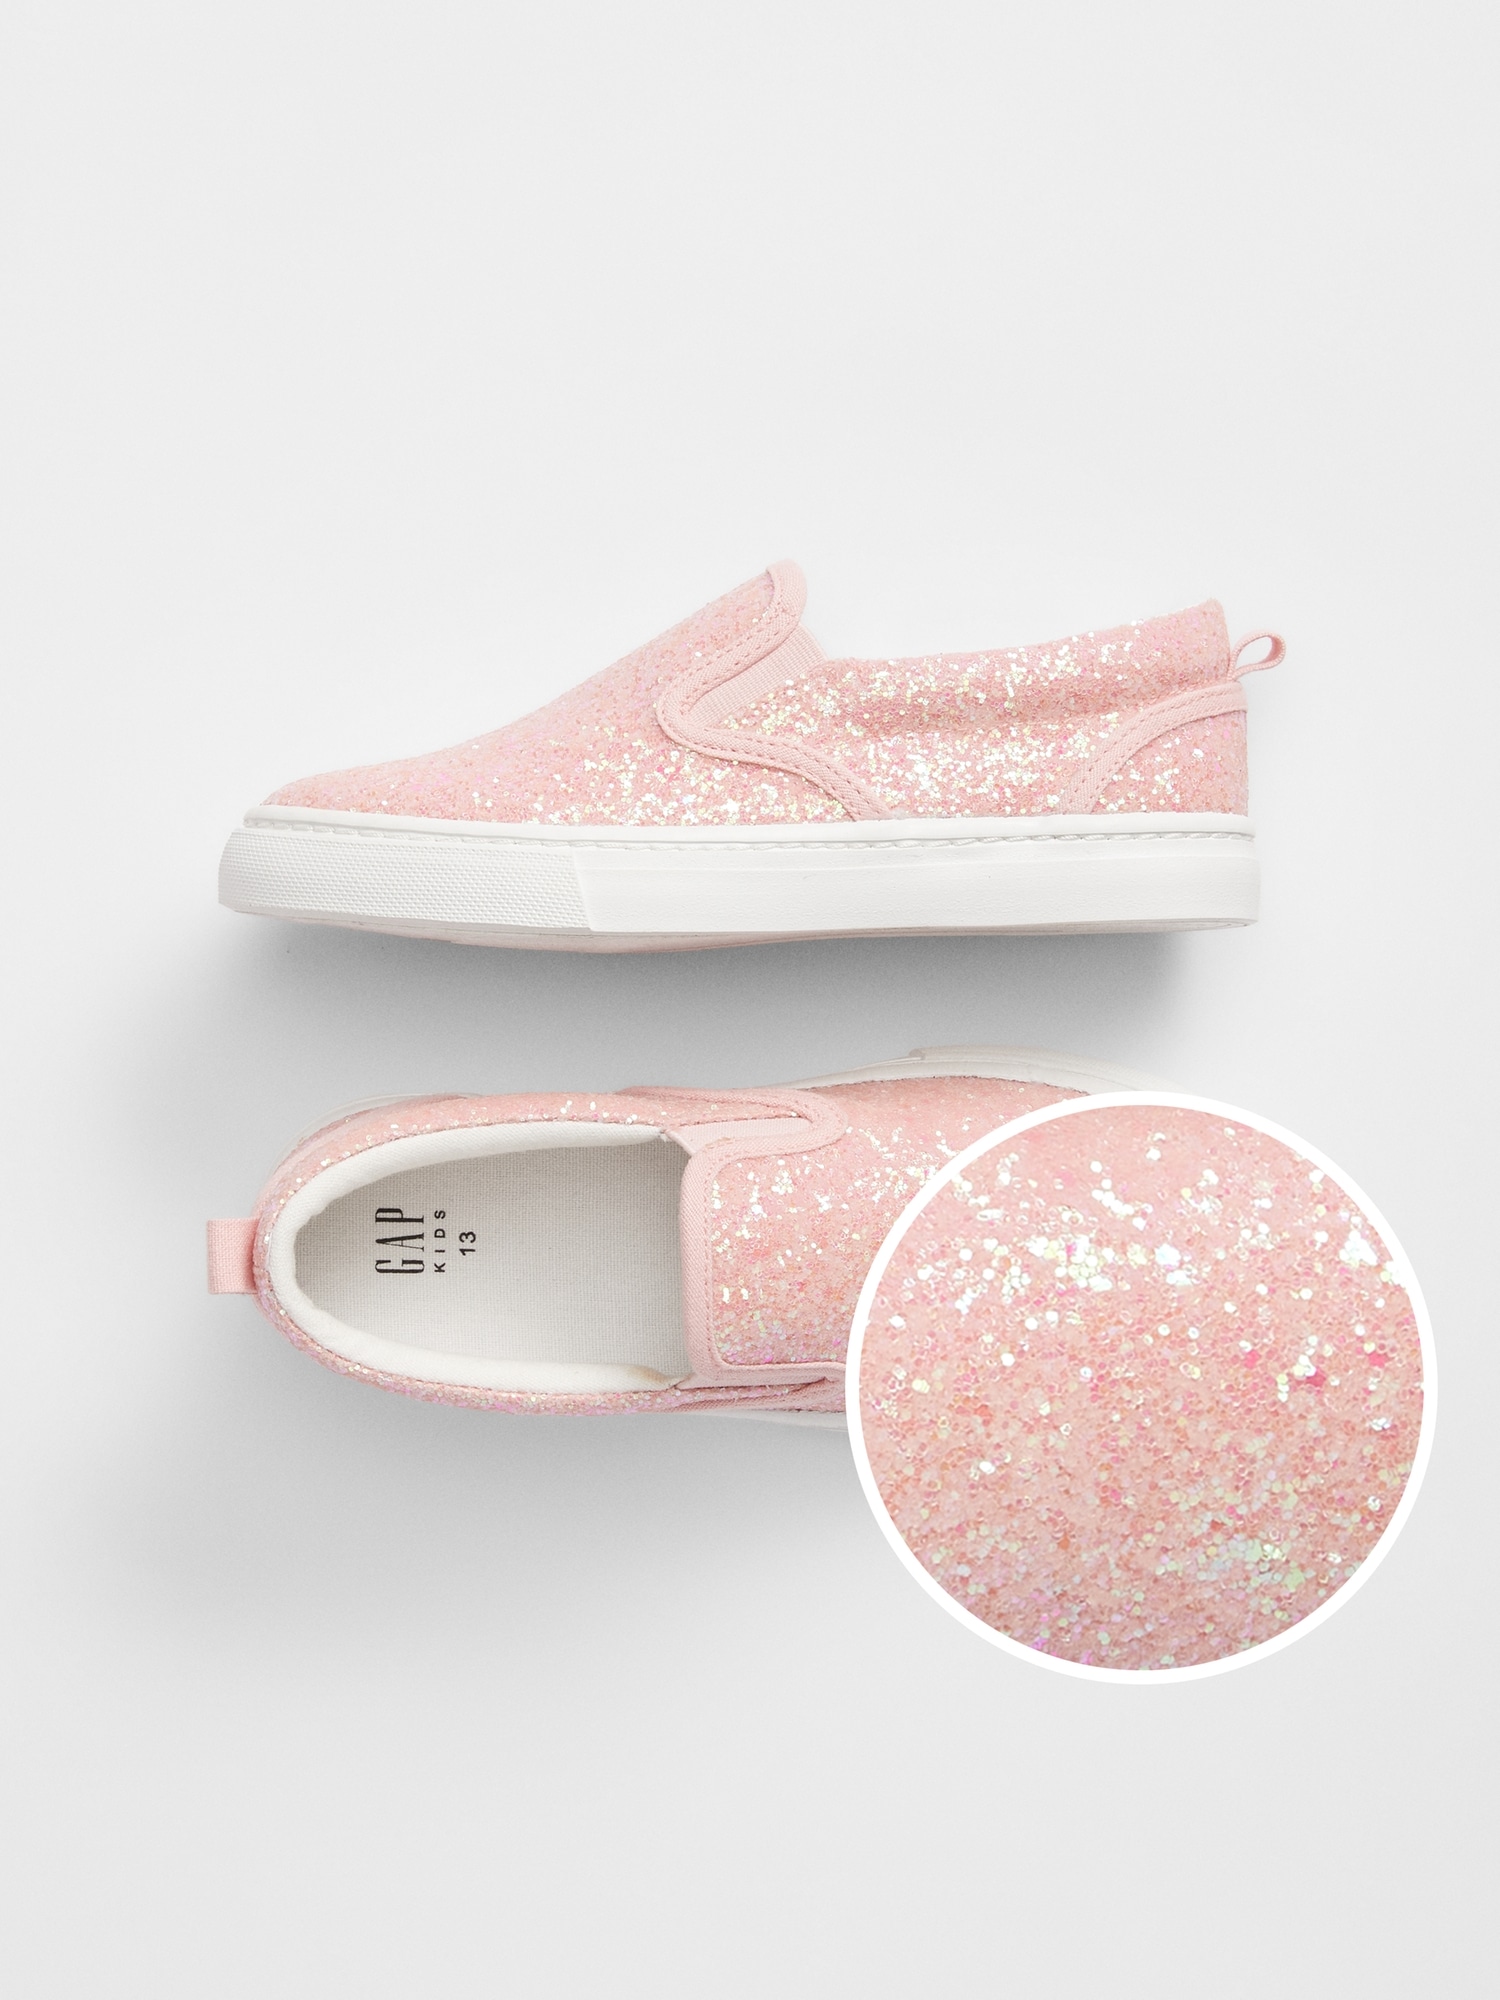 girls sparkly sneakers